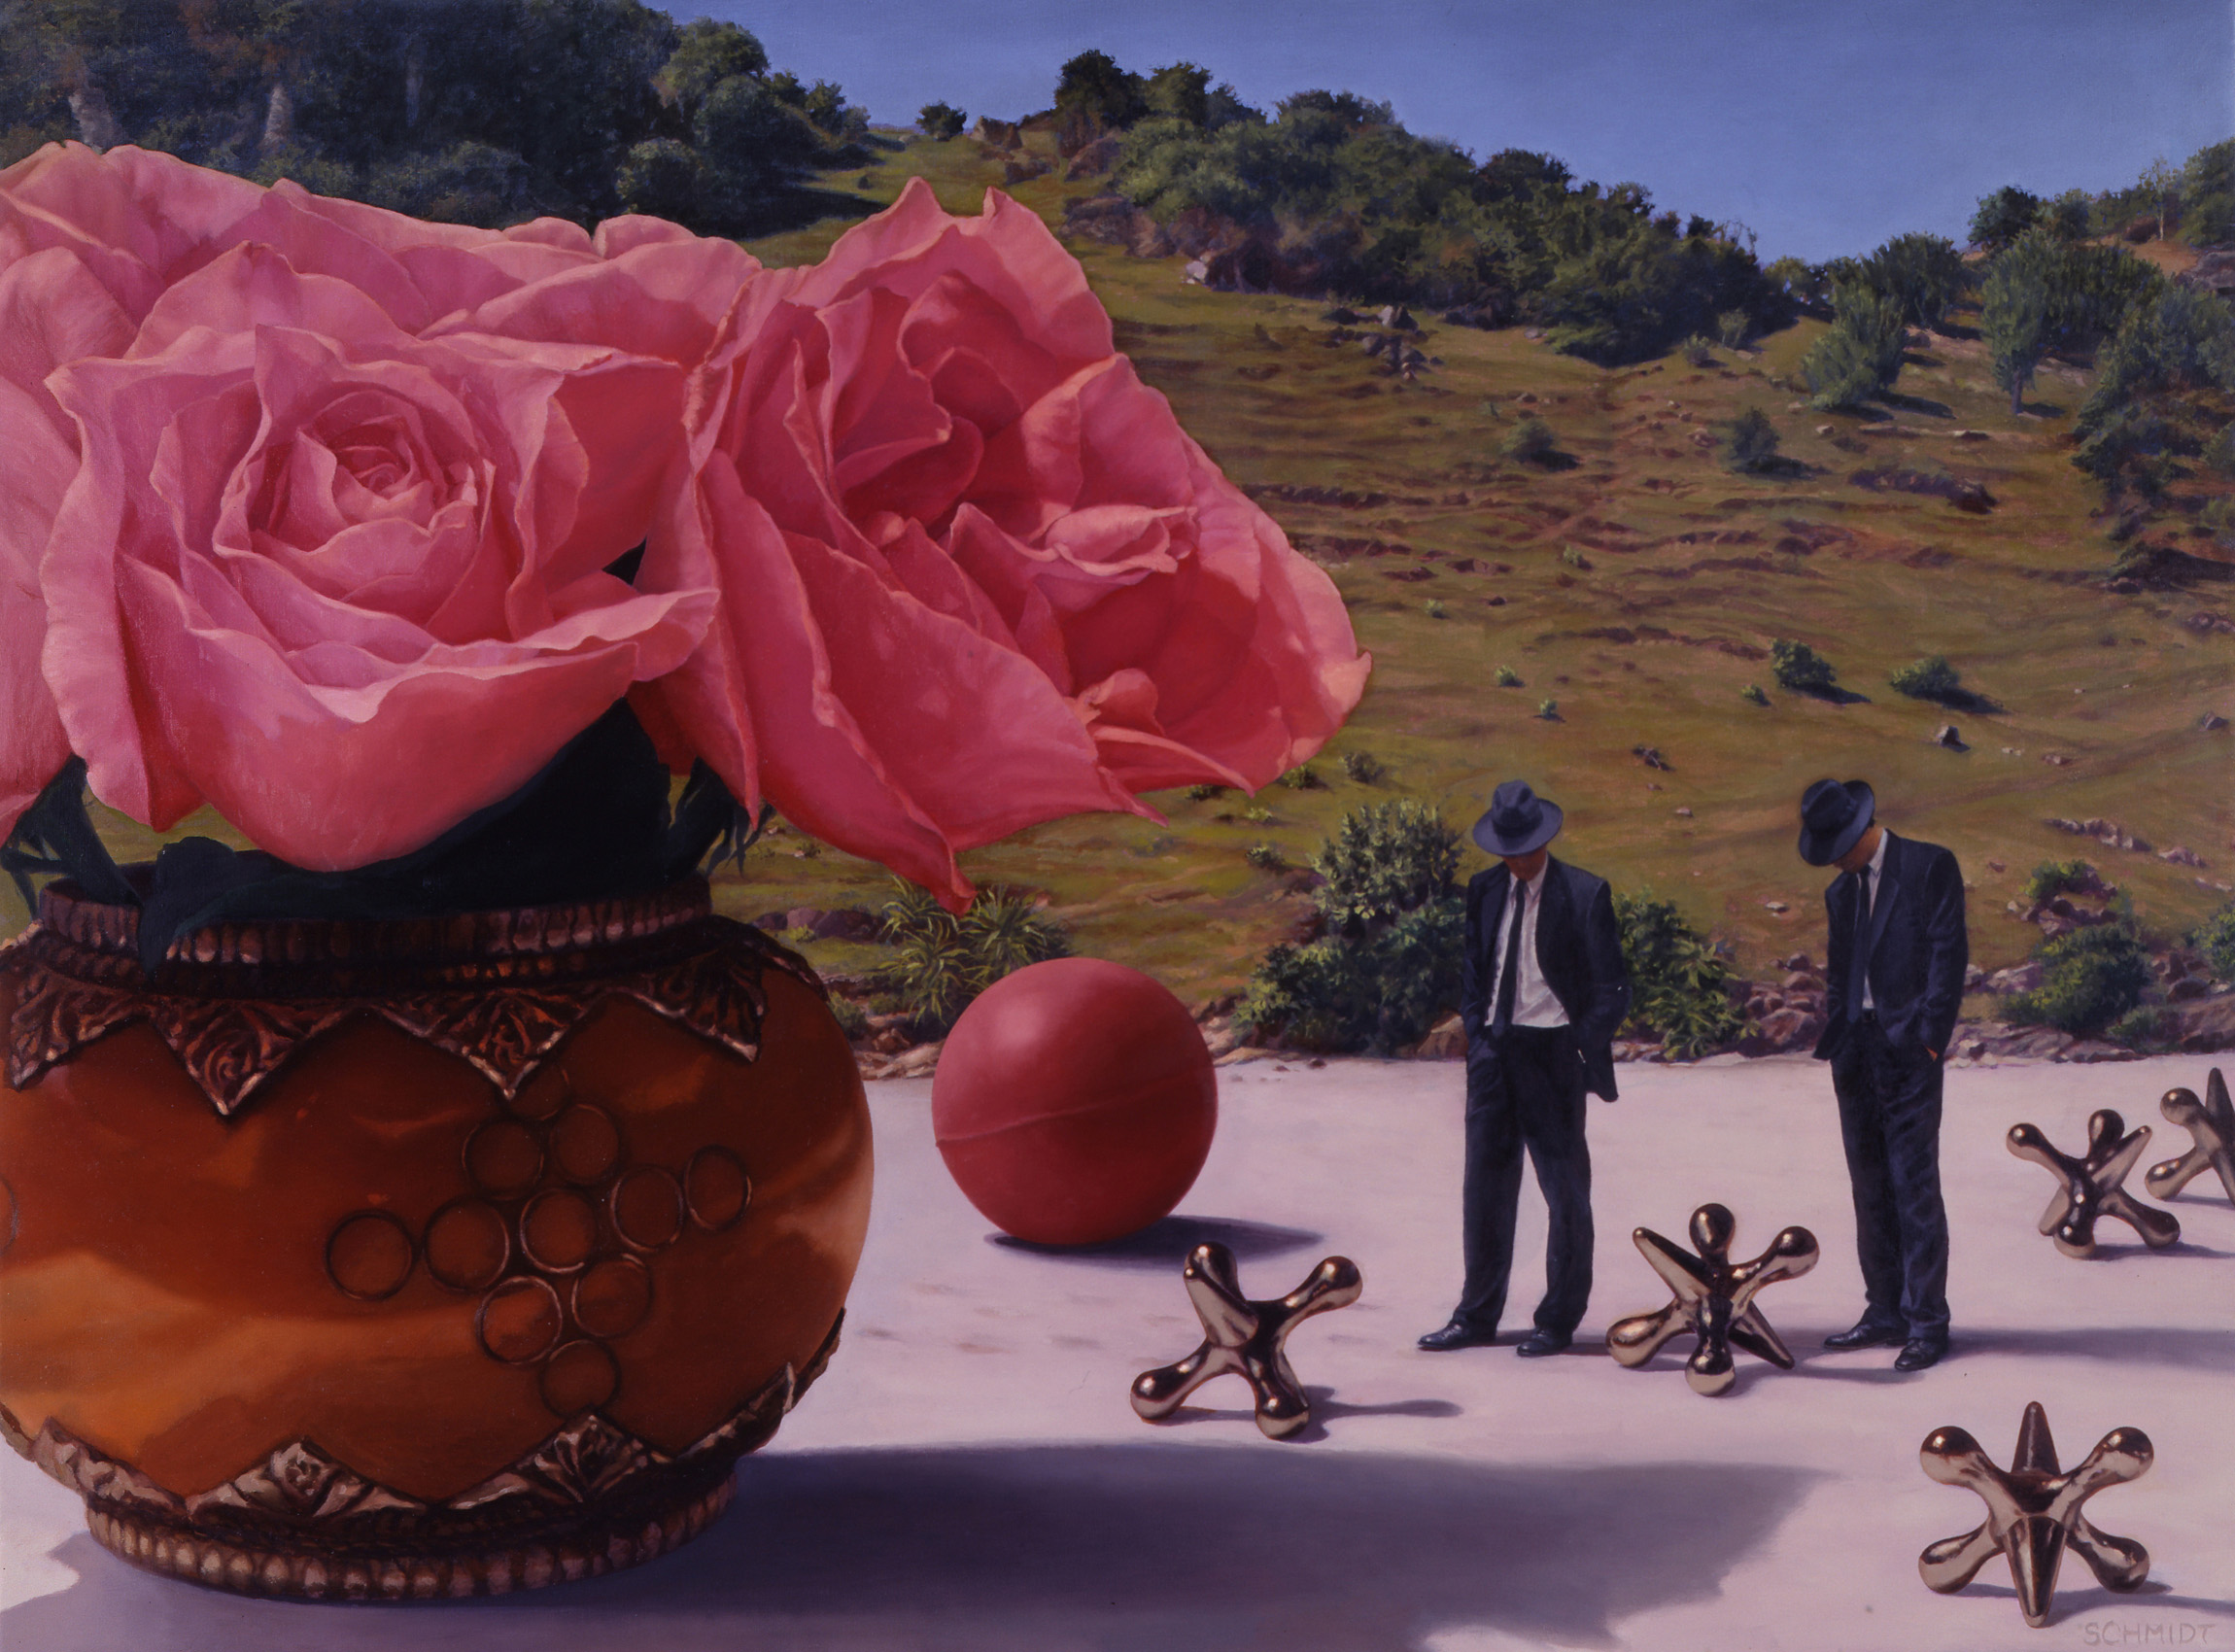 giant pink roses, moroccan amber vase, beach scene, giant jacks and ball, landscape, diminutive male figures wearing suits and fedora hats